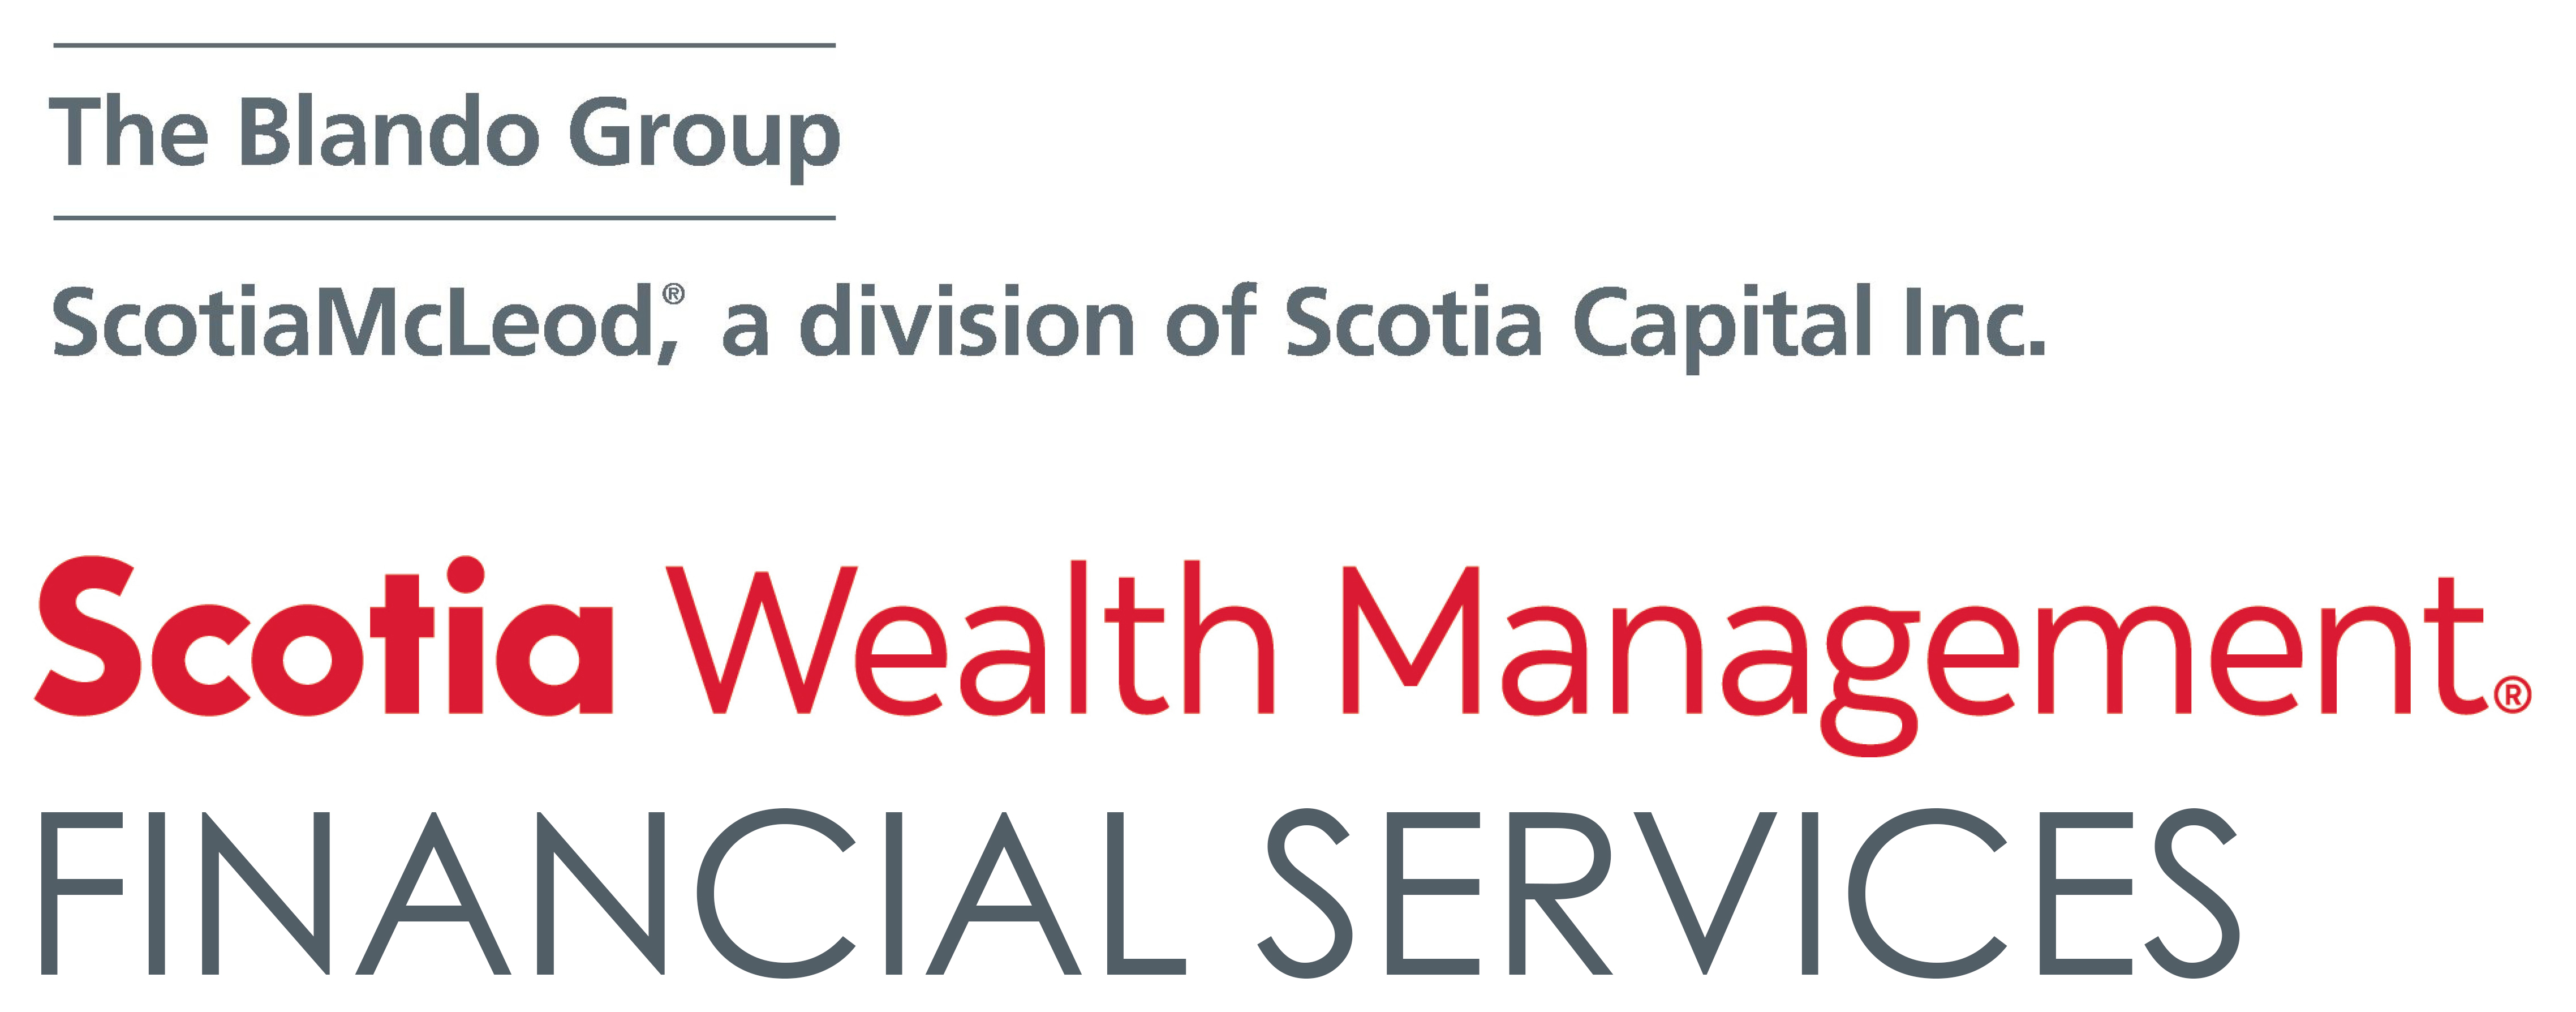 The Blando Group, Scotia McLeod, a division of Scotia Capital Inc. Scotia Wealth Management Financial Services